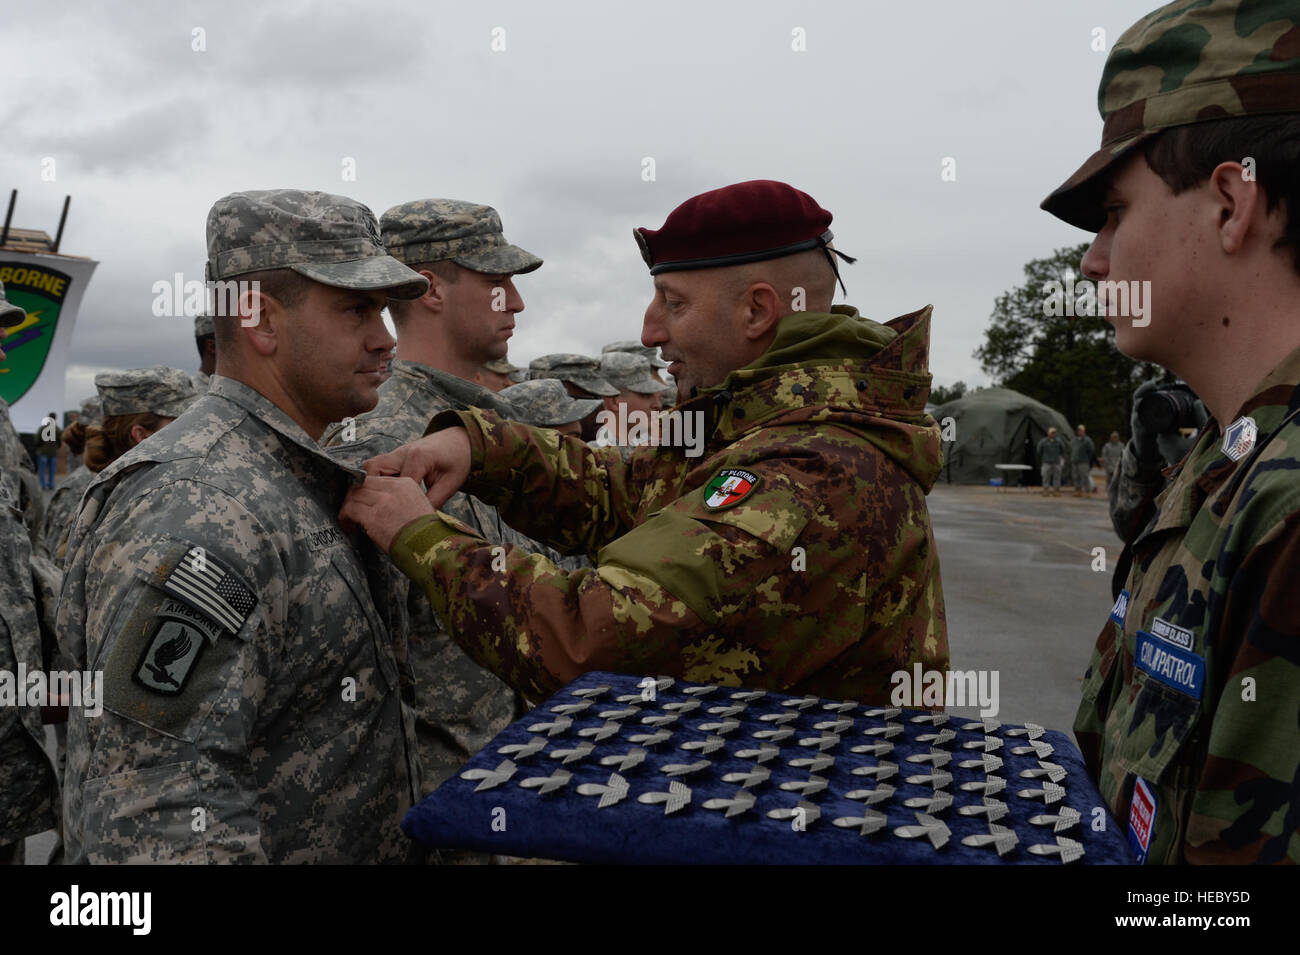 Corporal Mauro Alasia, Italian Army paratrooper, distributes Italian jump wings during Operation Toy Drop, Fort Bragg, N.C., Dec. 7, 2013. The 16th Annual Randy Oler Operation Toy Drop, hosted by the U.S. Army Civil Affairs & Psychological Operation Command (Airborne), is the largest combined airborne operation in the world where Fort Bragg's paratroopers and allied jumpmasters donate toys to be distributed to children's homes and social service agencies across the local community. (U.S. Air Force photo by Senior Airman Kenneth W. Norman / Released) Stock Photo